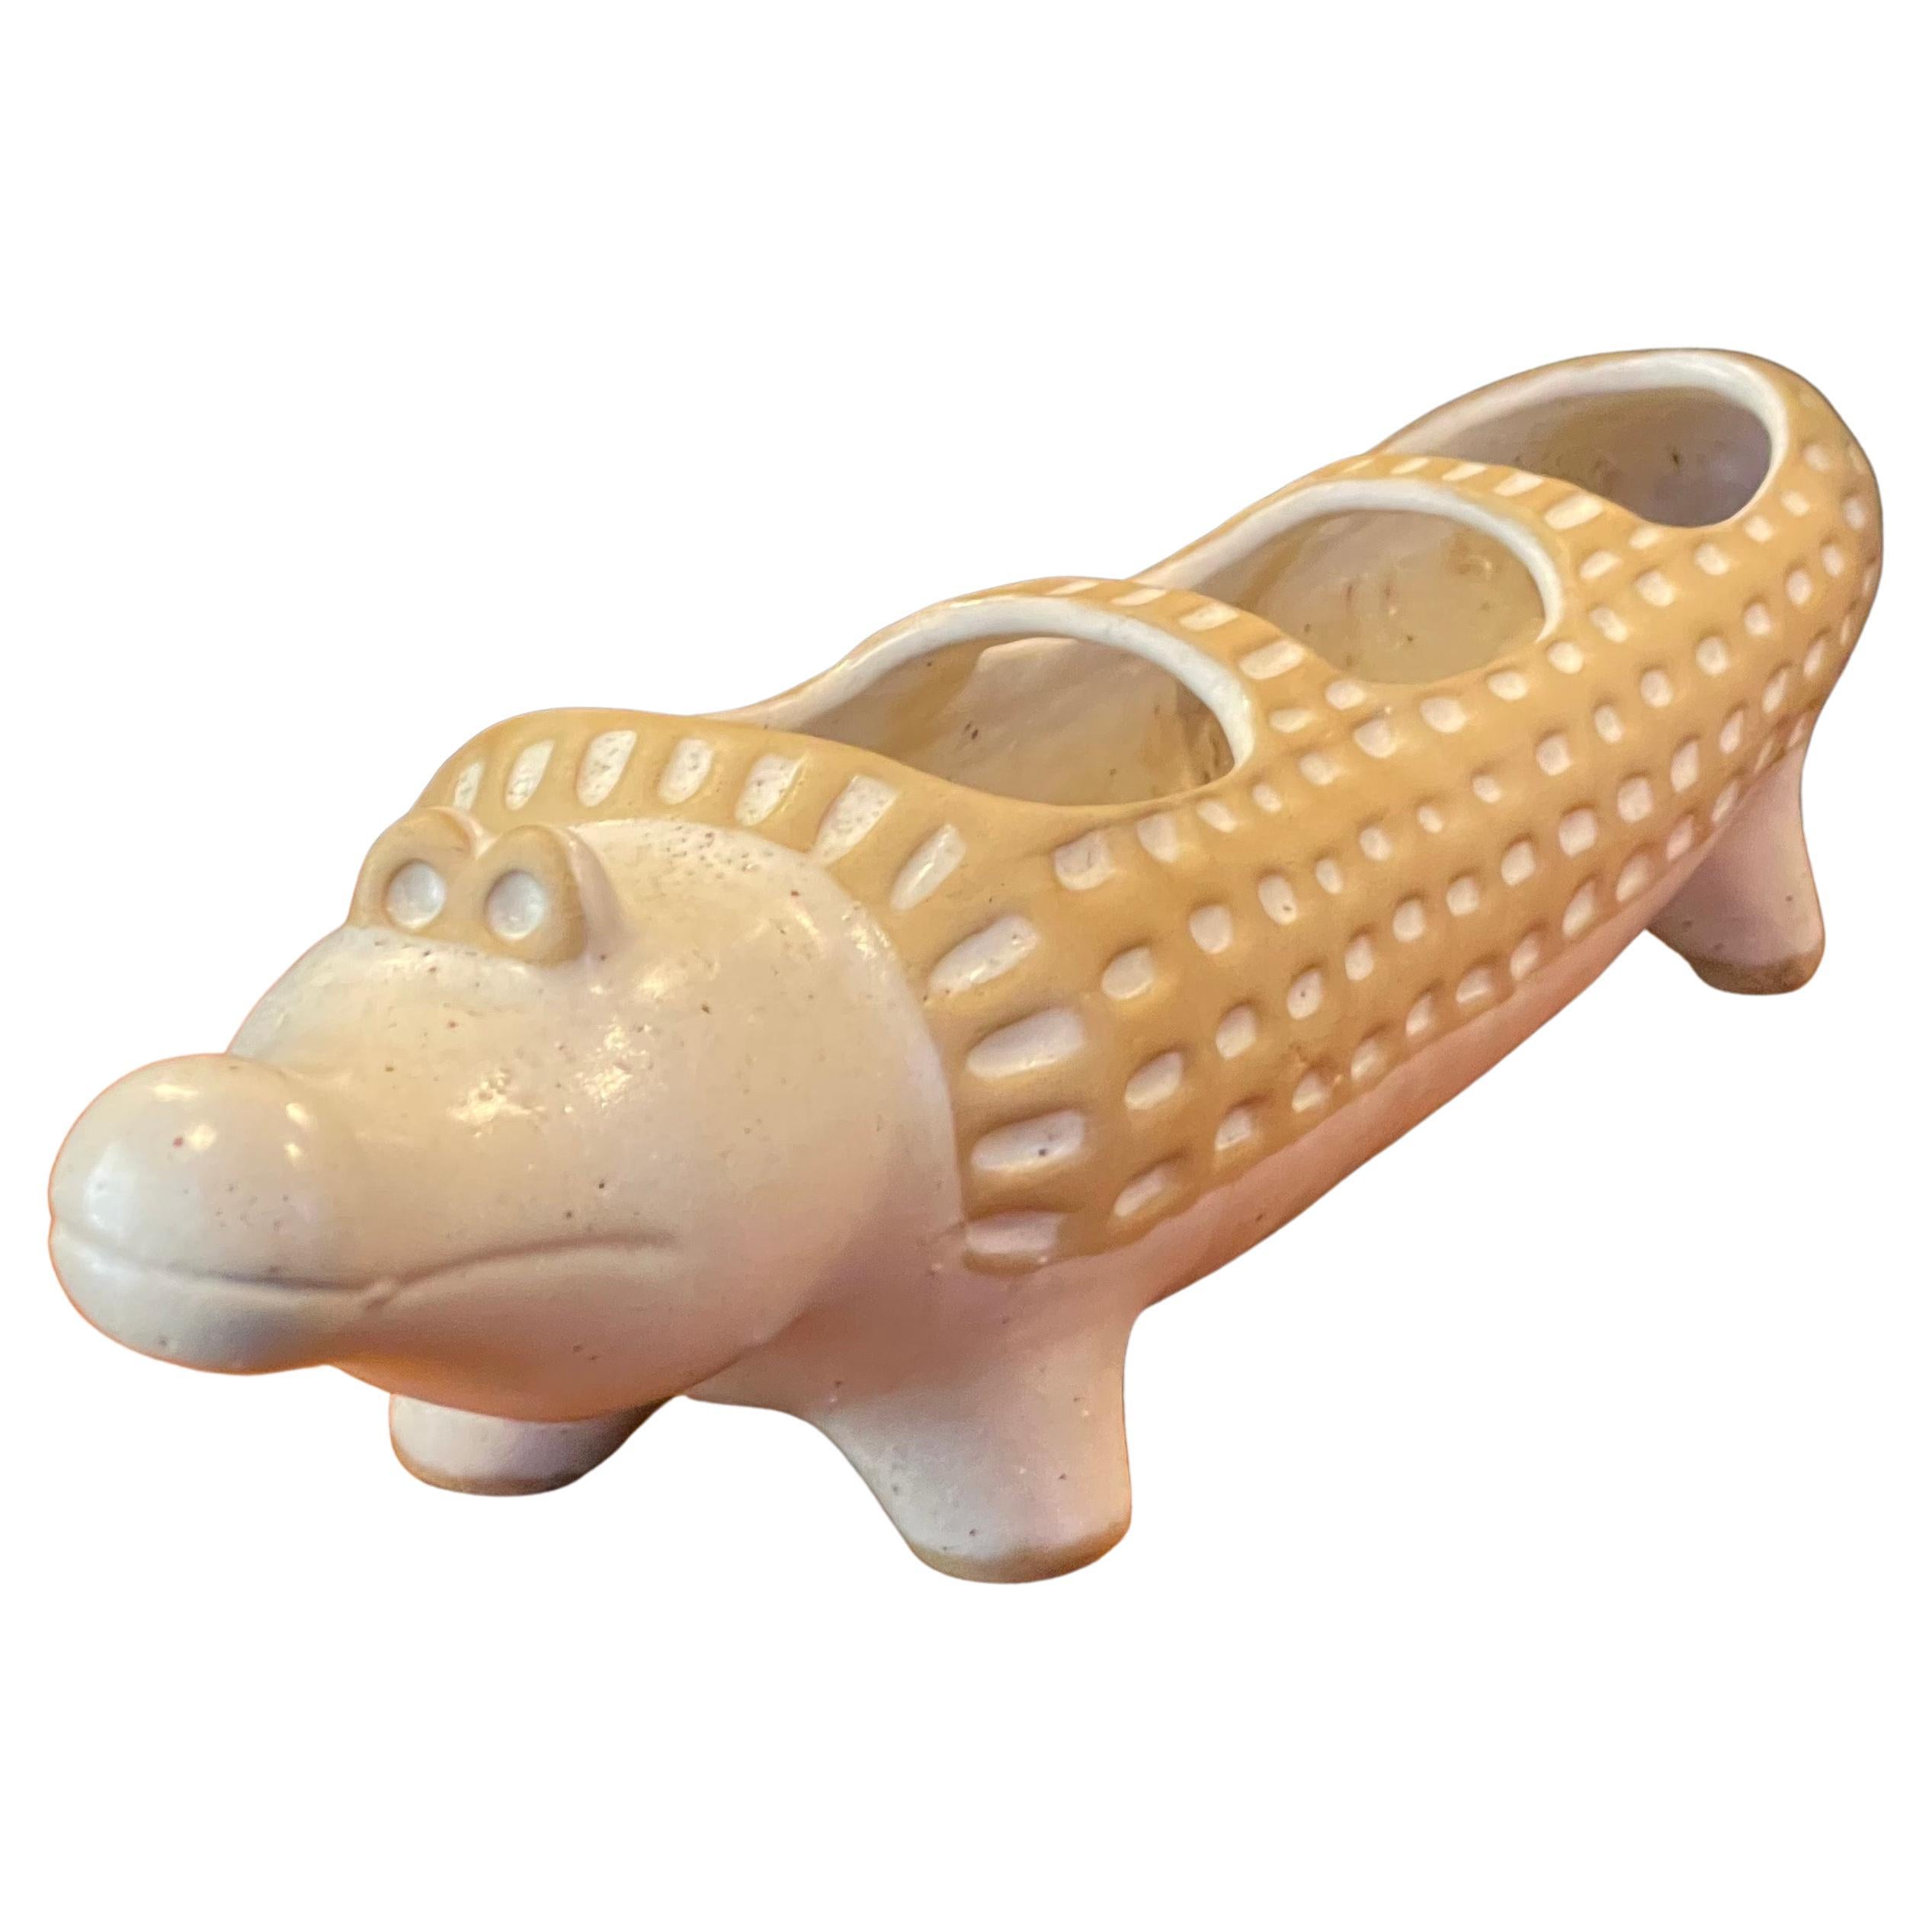 Large vintage stoneware alligator planter by David Stewart, circa 1970s. The piece is in very good vintage condition with no chips or cracks and measures a substantial 18.75